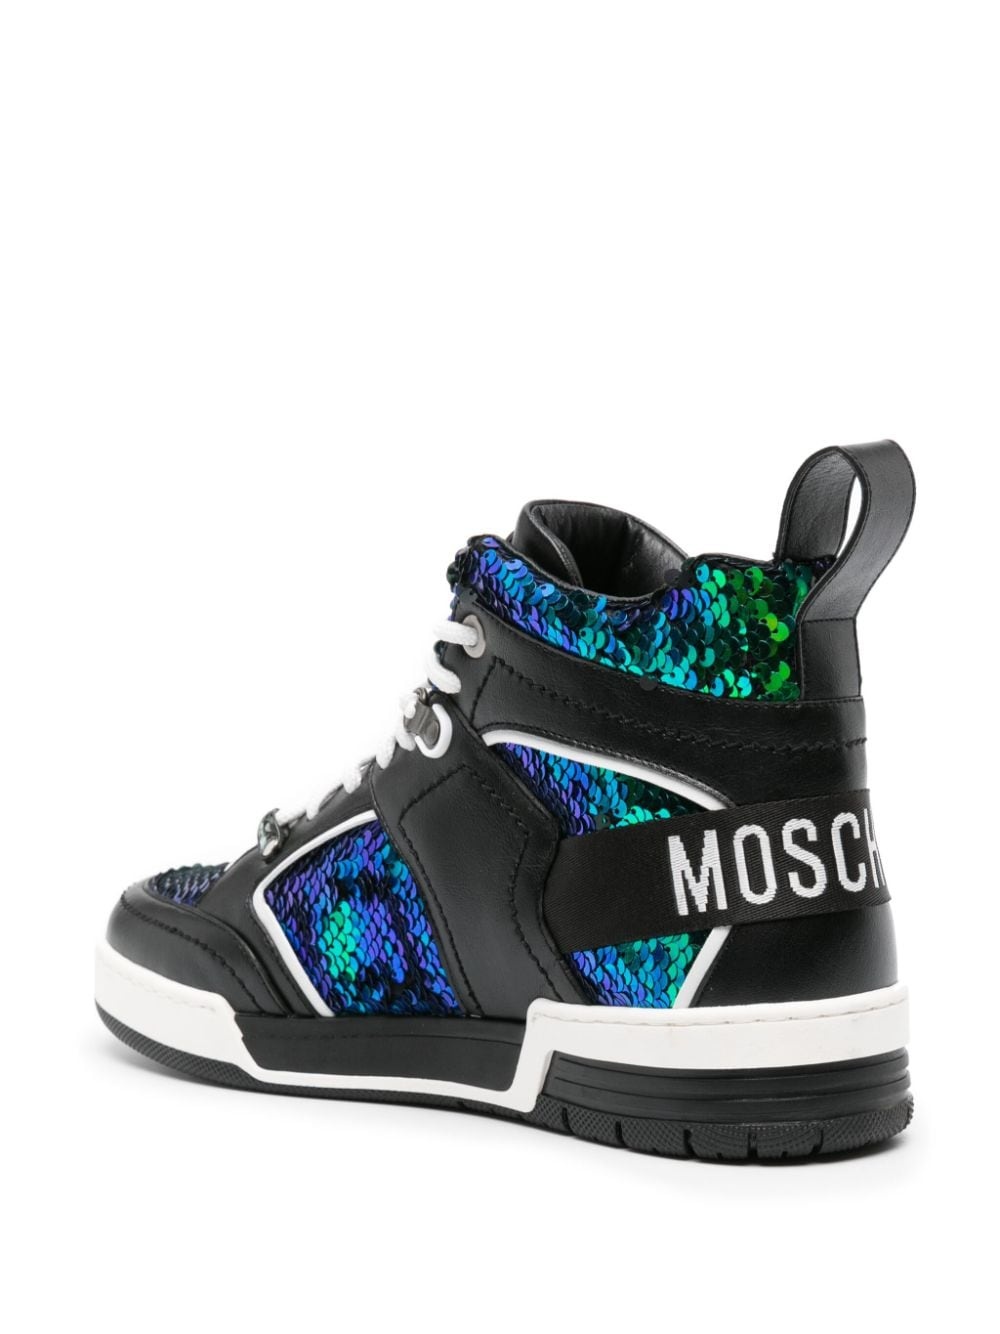 sequin-embellished high-top sneakers - 3